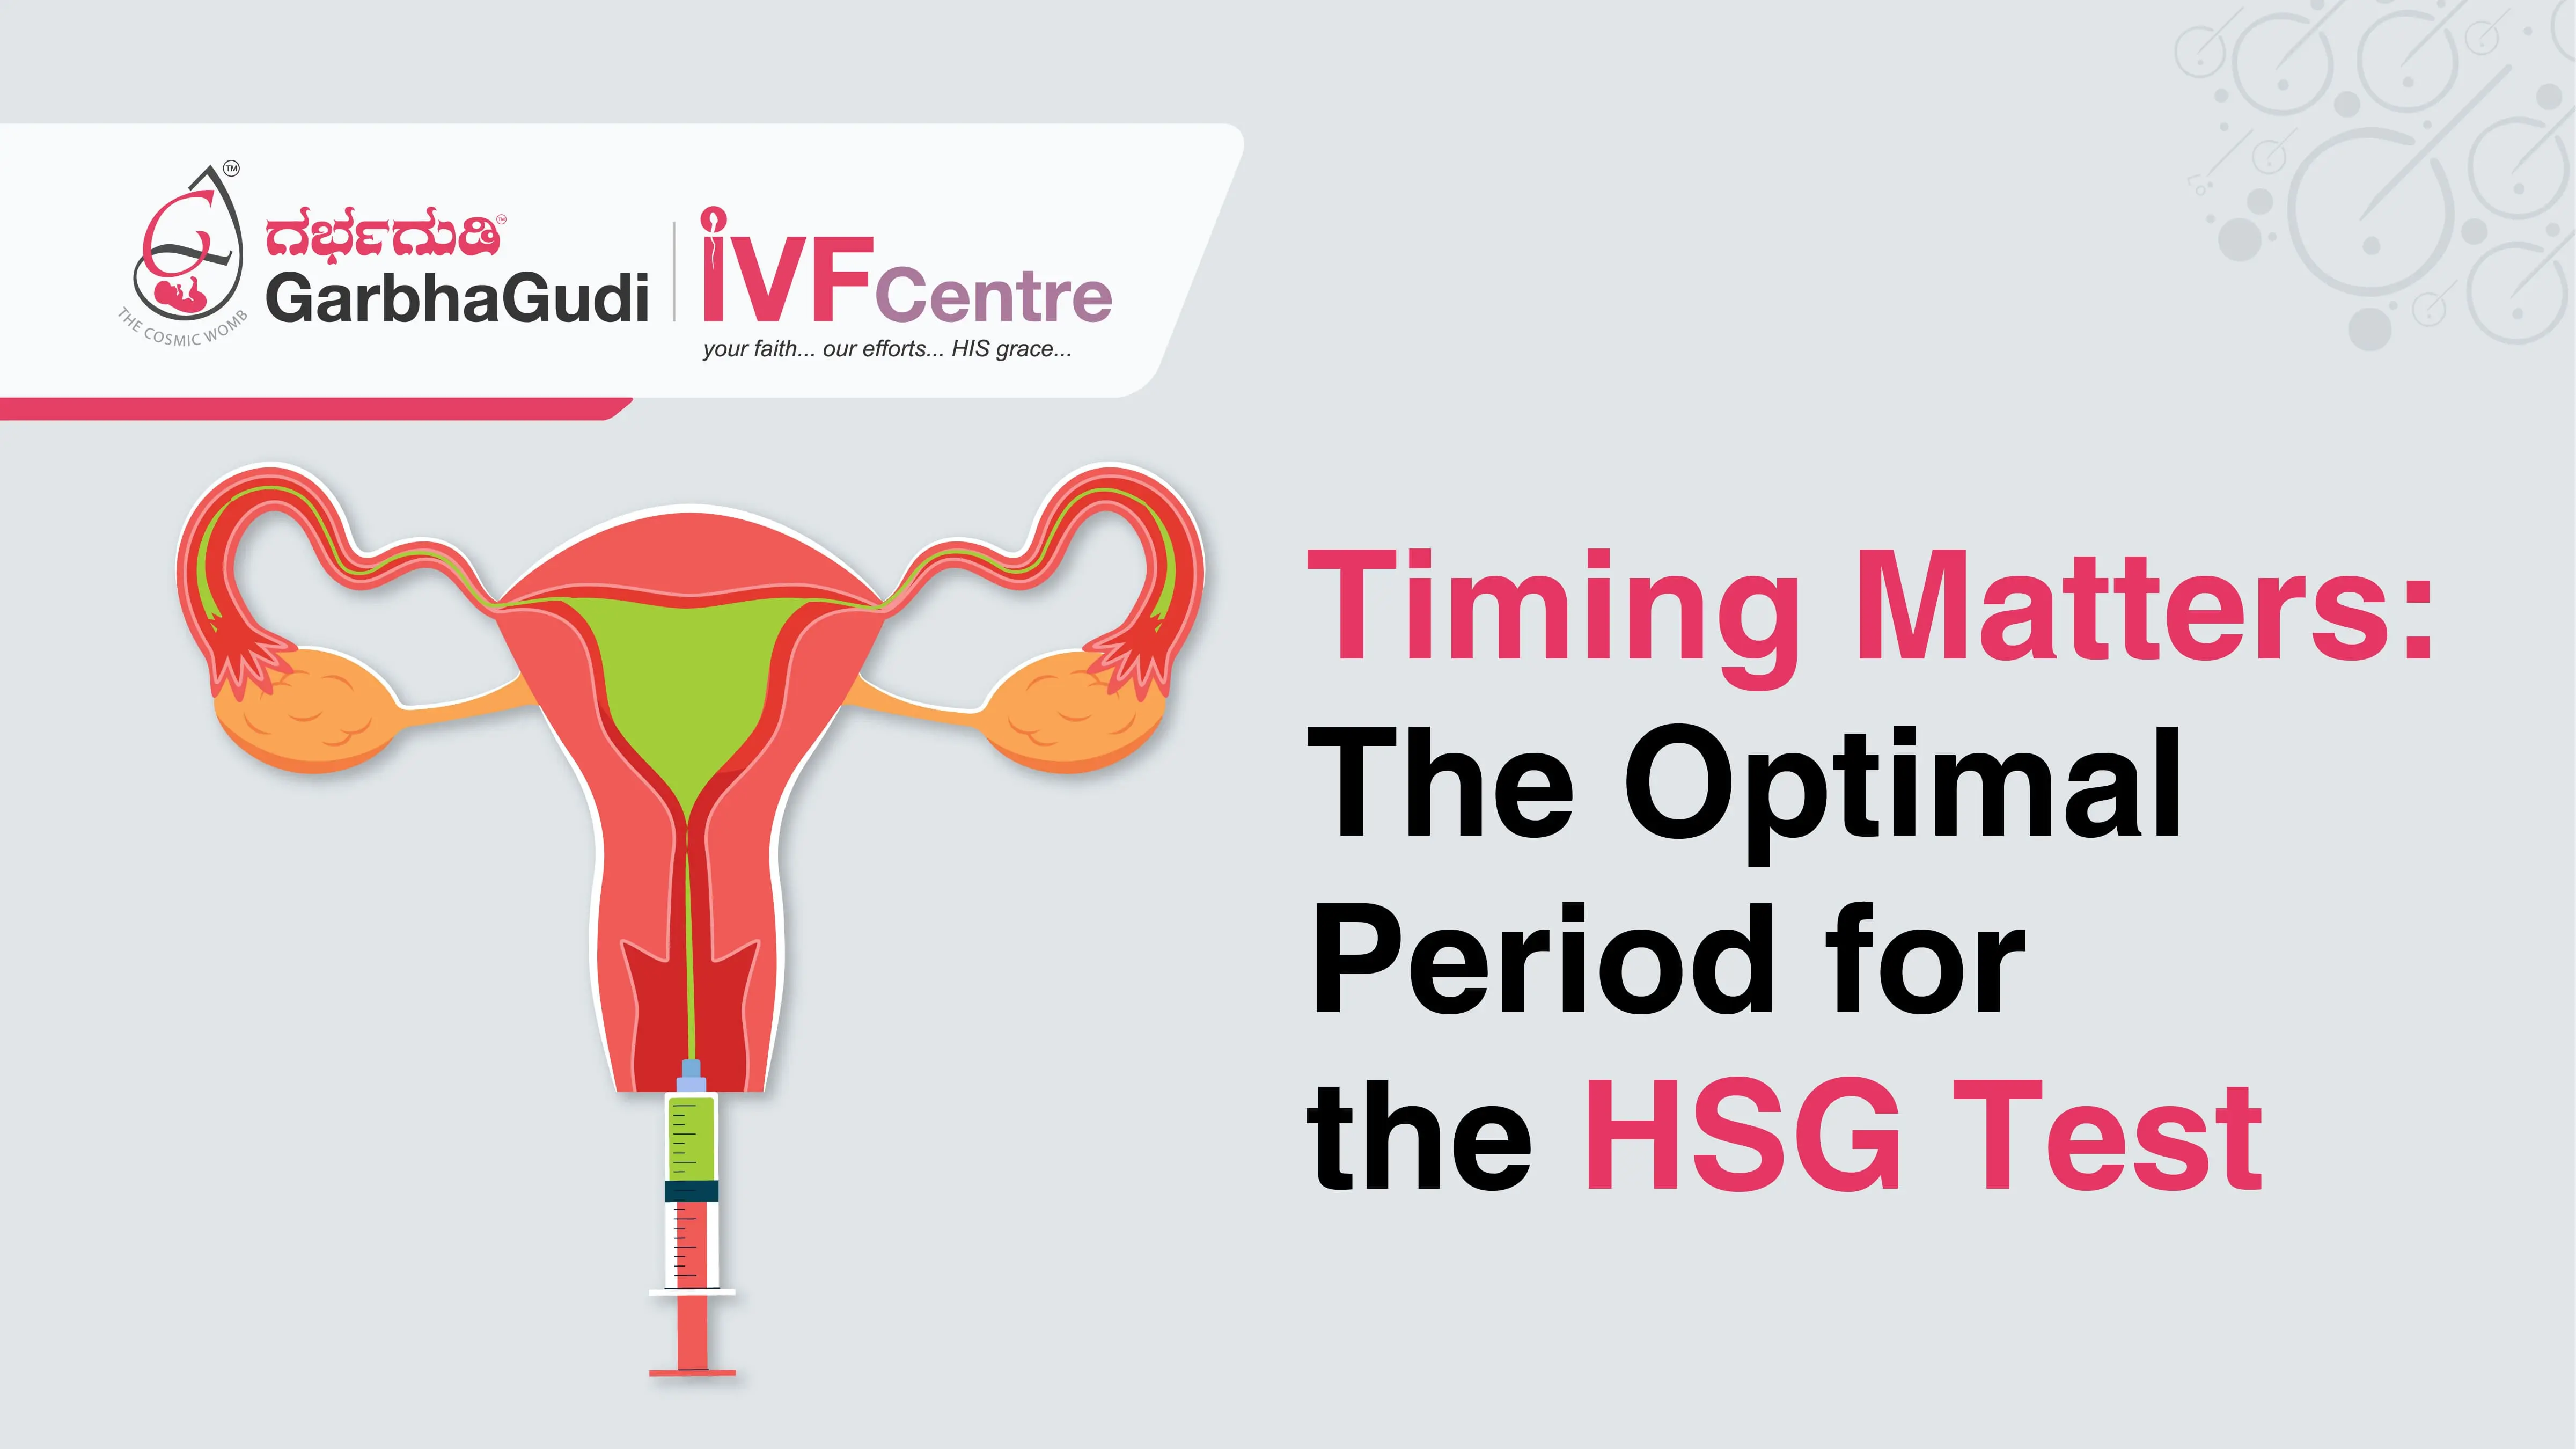 Timing Matters: The Optimal Period for the HSG Test